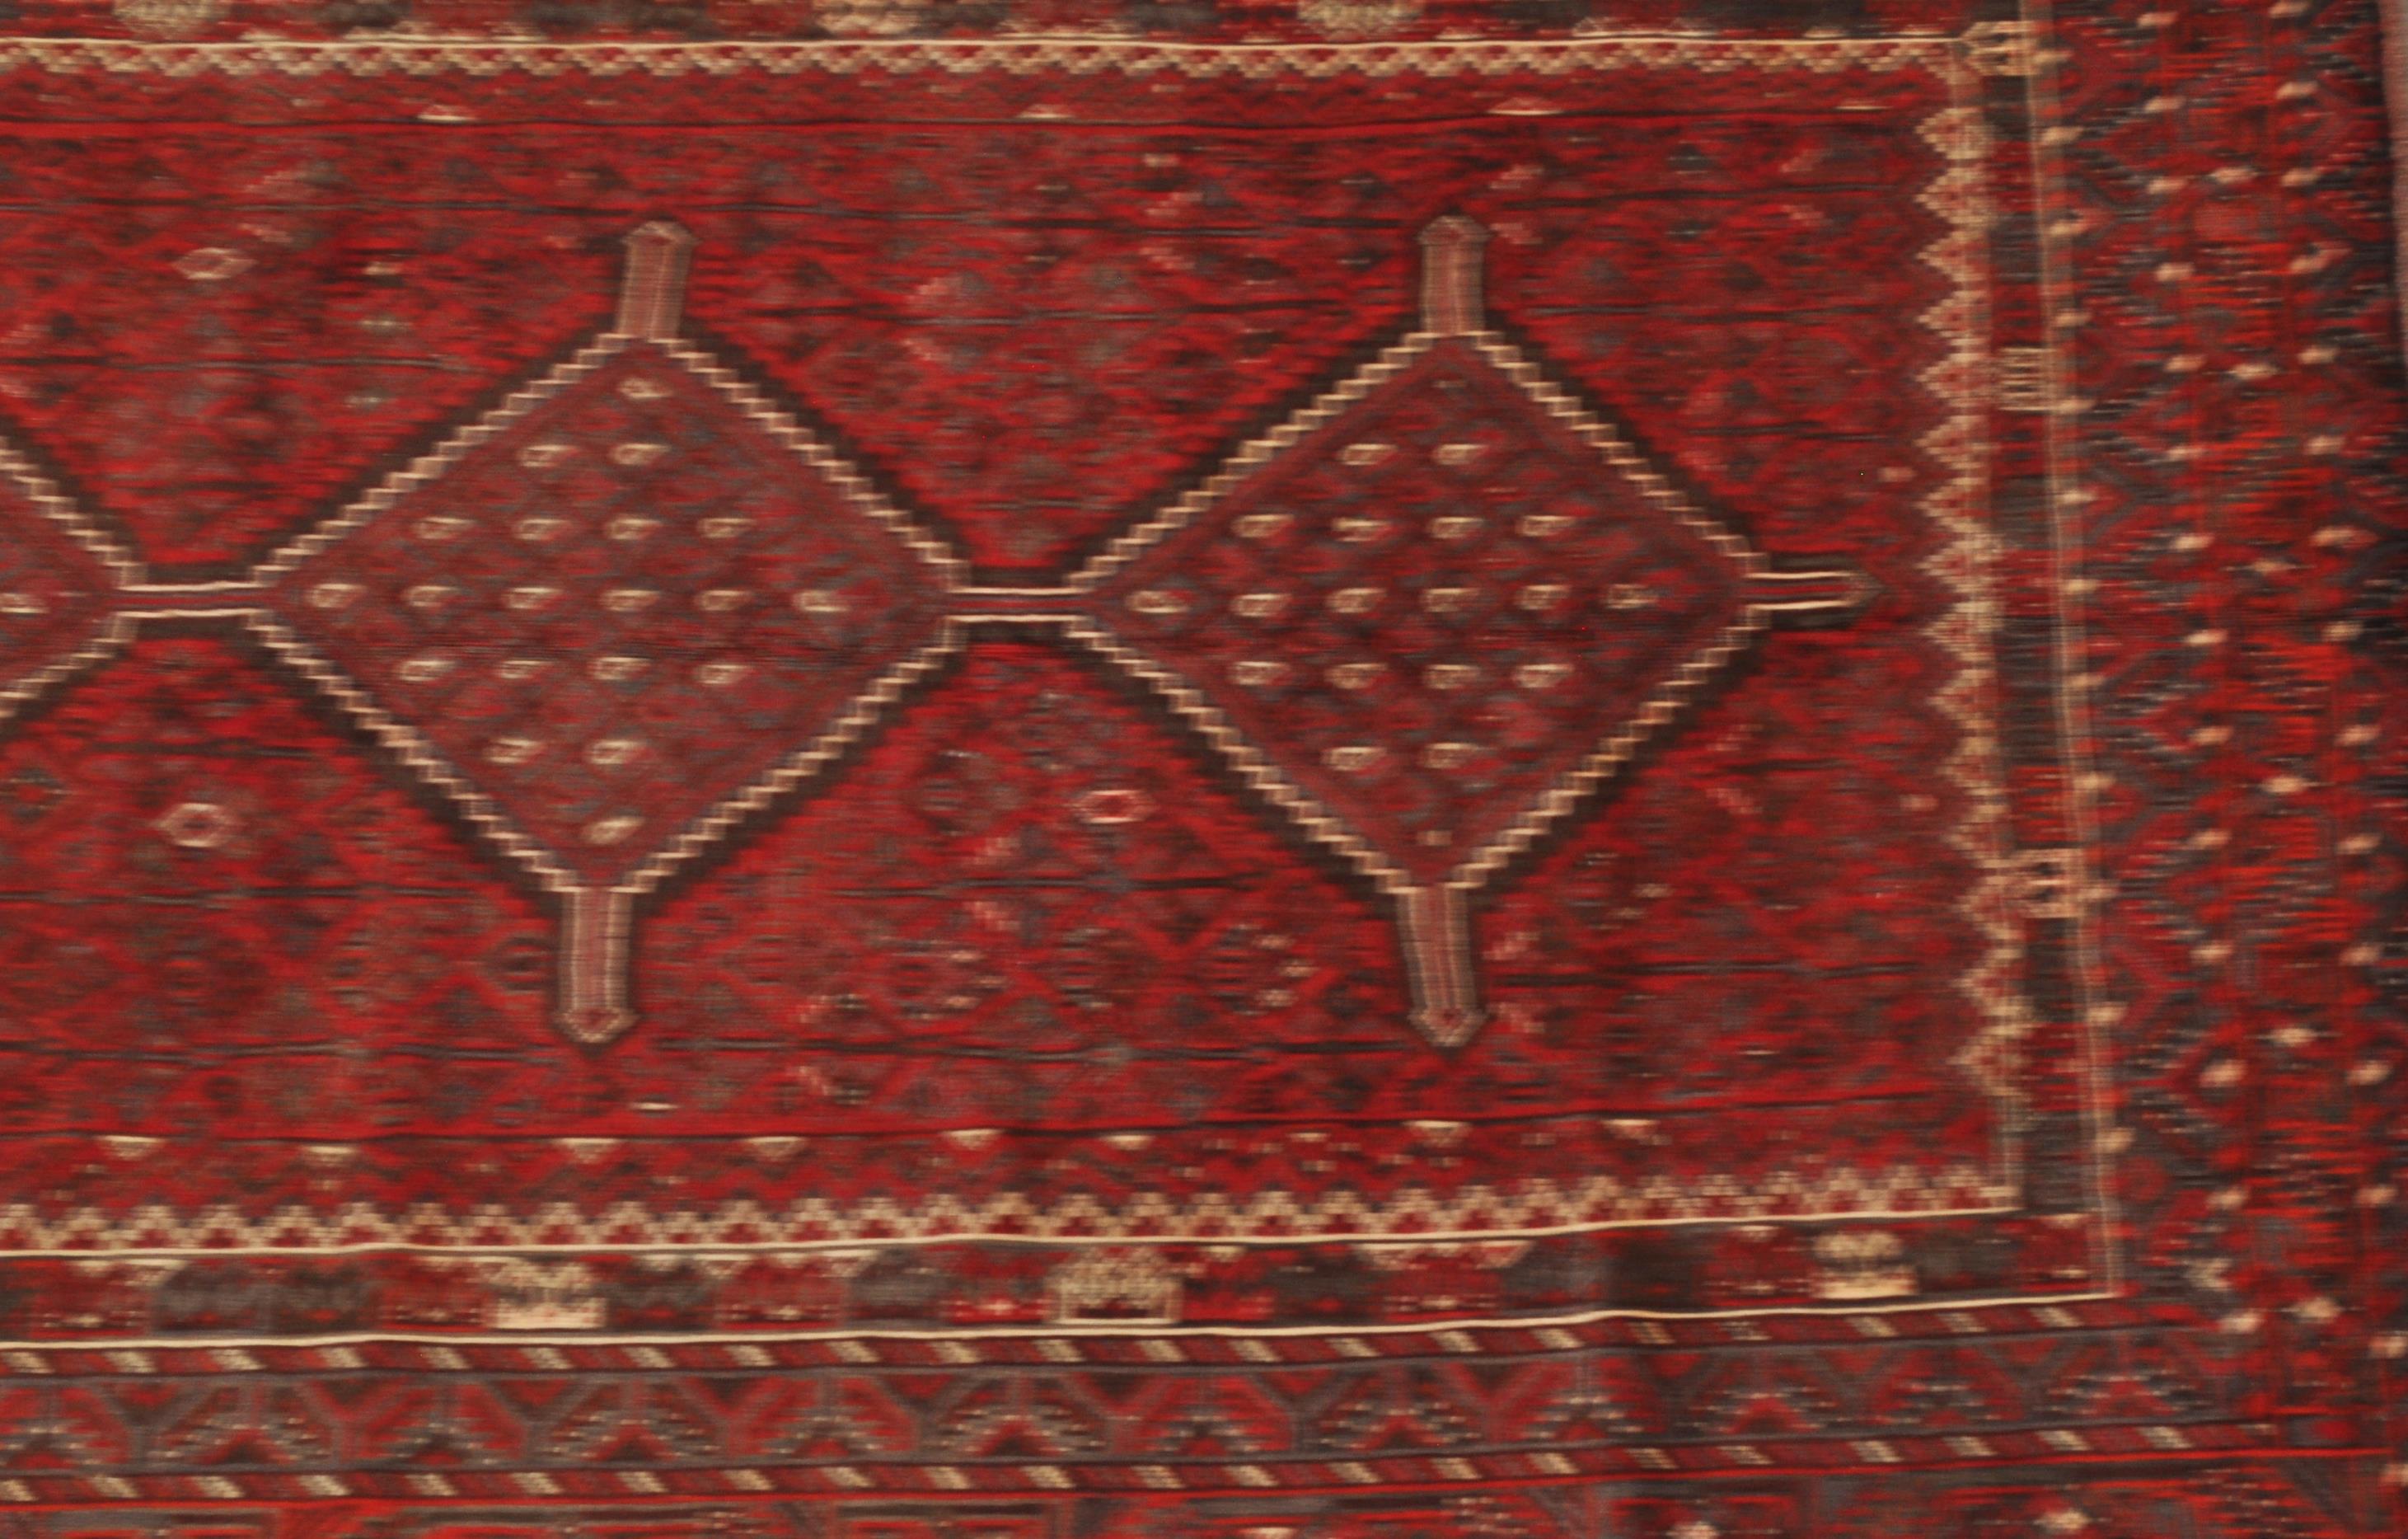 WOOL ON COTTON HAND KNOTTED PERSIAN ISLAMIC SHIRAZ CARPET RUG - Image 4 of 5